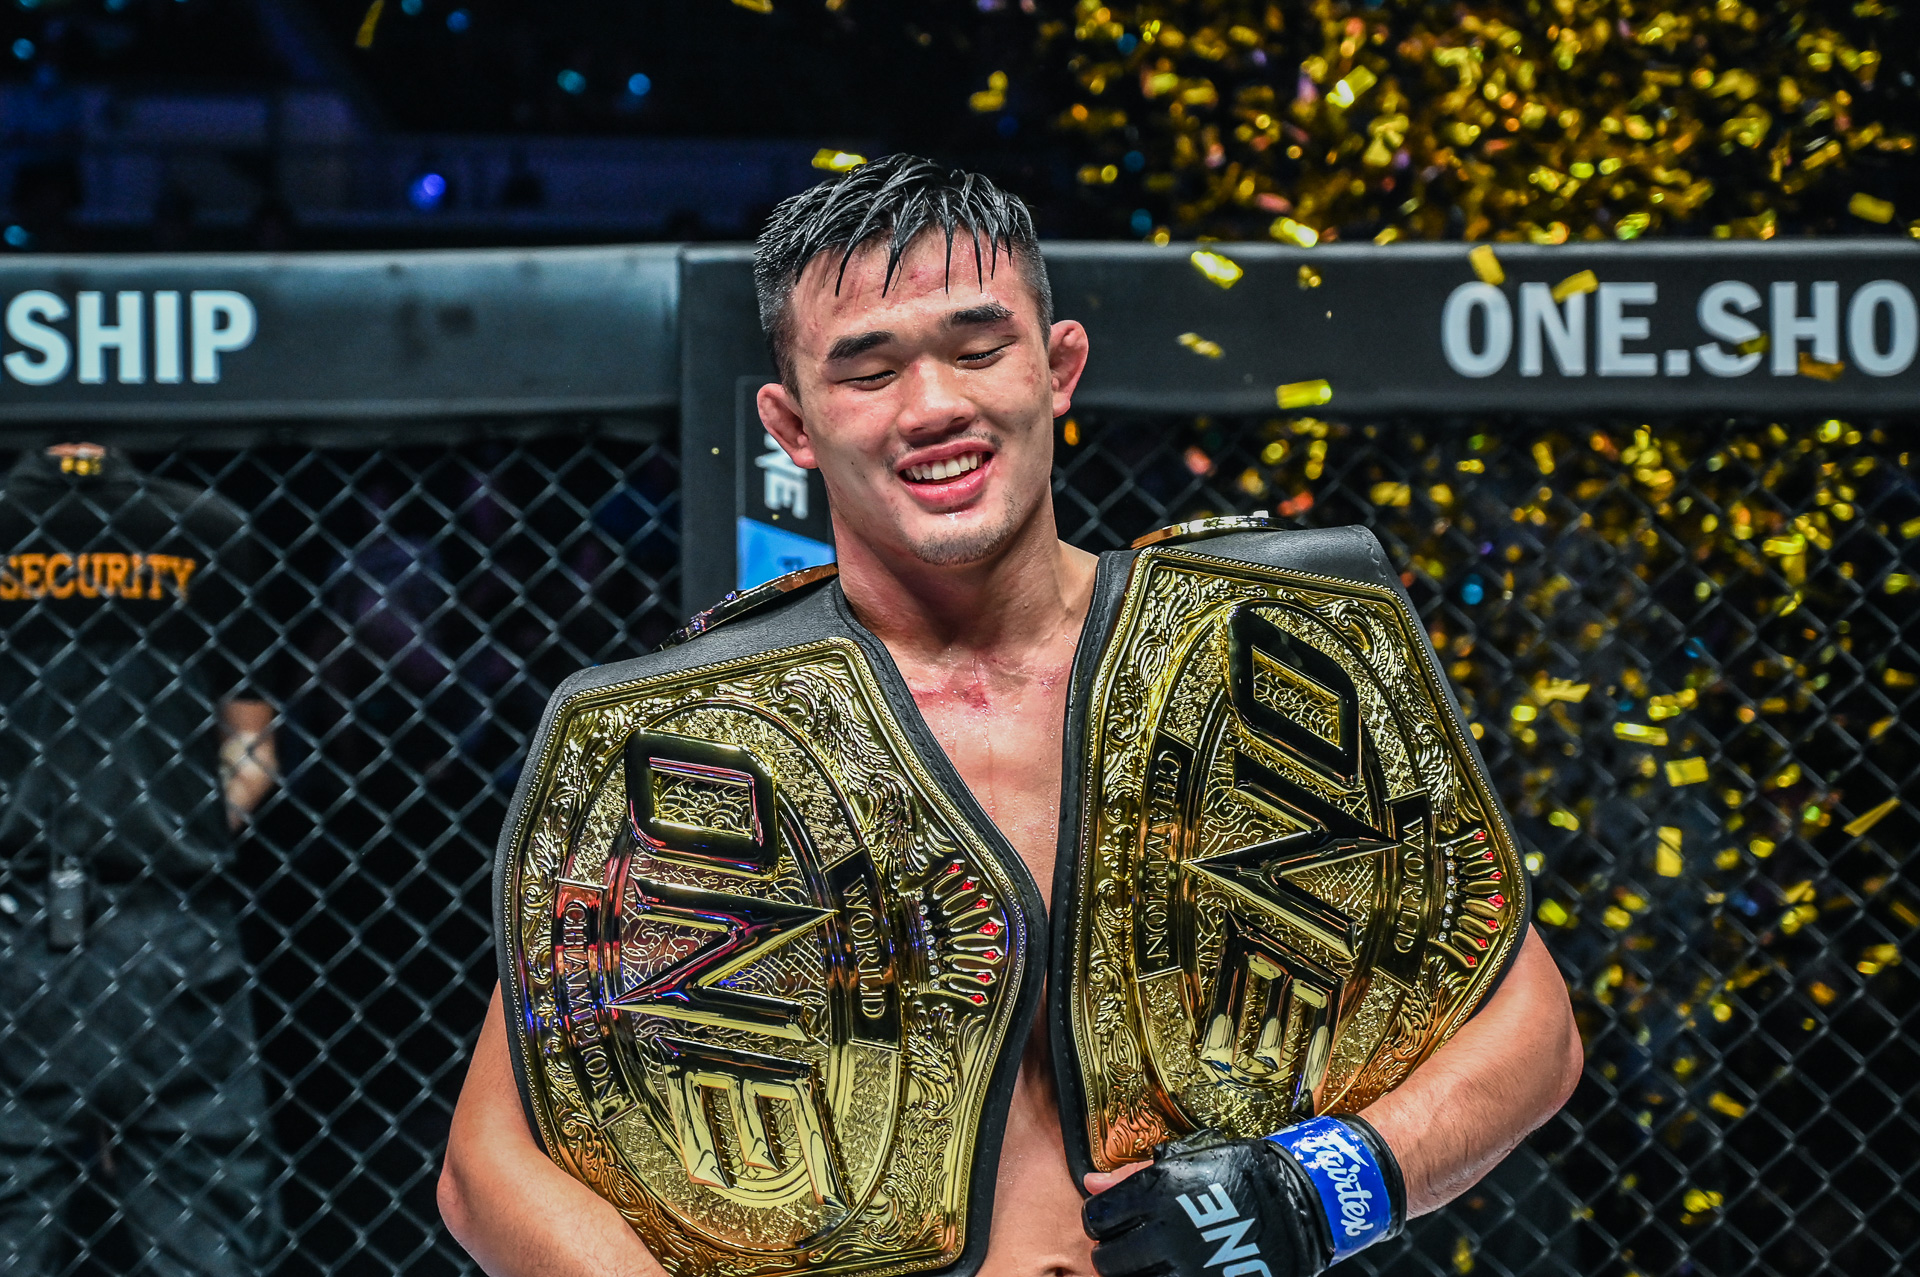 Christian Lee becomes the new ONE Welterweight World Champion